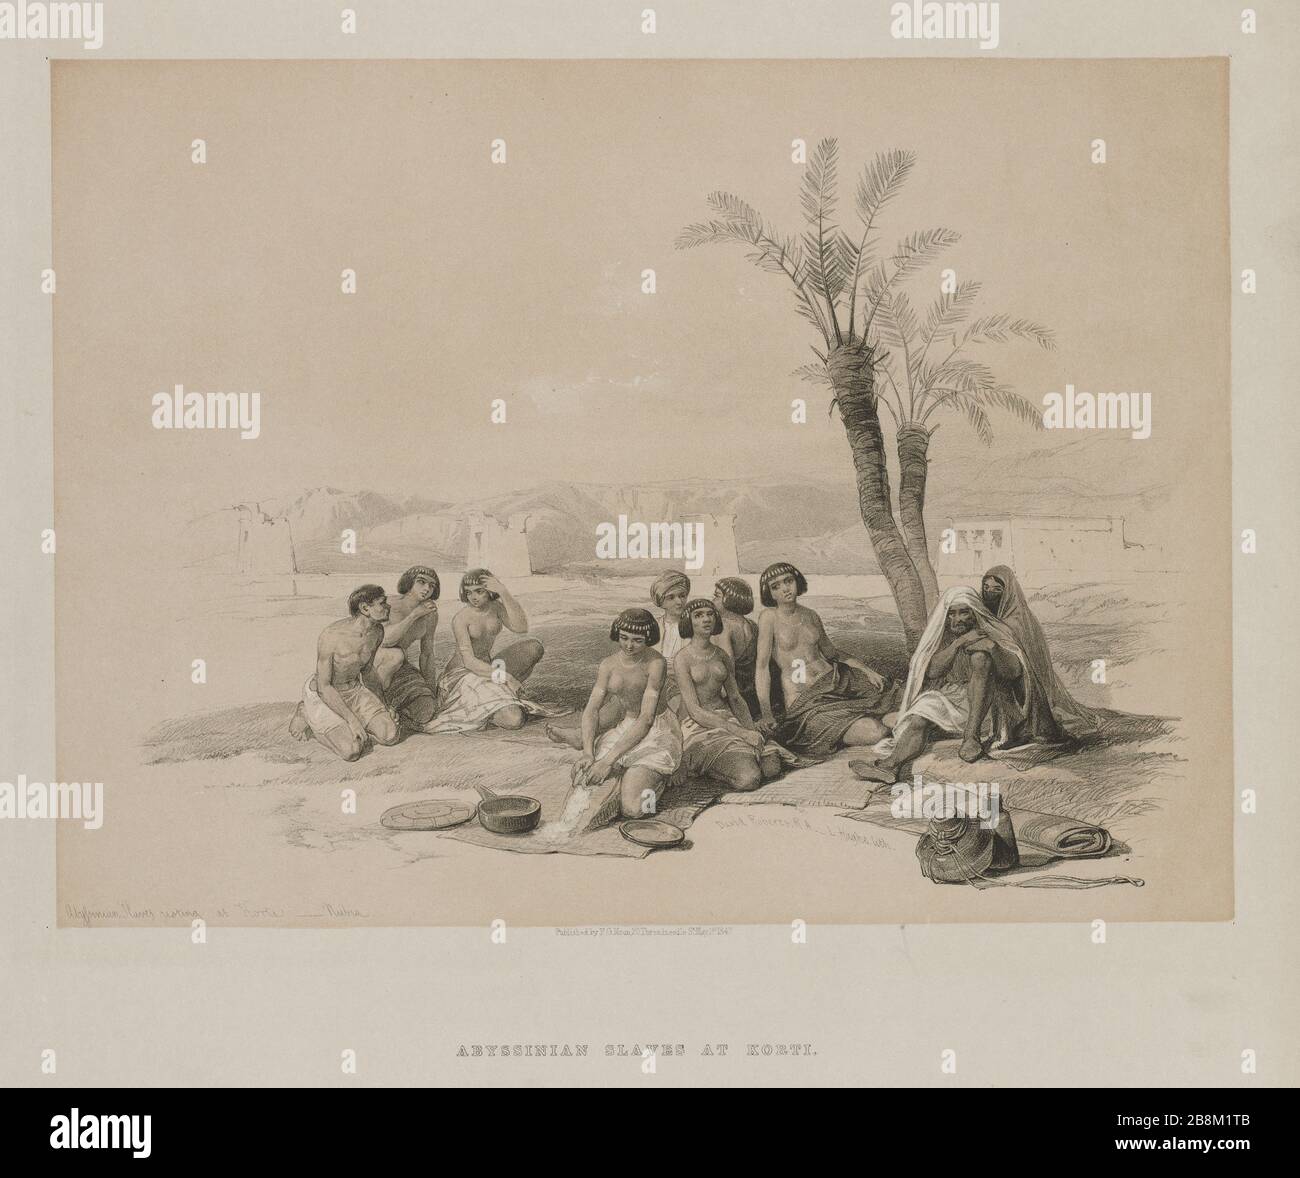 Abyssinian Slaves Resting at Korti (Kurti) Sudan Nubia from Egypt and Nubia, Volume I: Abyssinian Slaves Resting at Korti-Nubia, 1847. Louis Haghe (British, 1806-1885), F.G.Moon, 20 Threadneedle Street, London, after David Roberts (British, 1796-1864). Color lithograph; Stock Photo